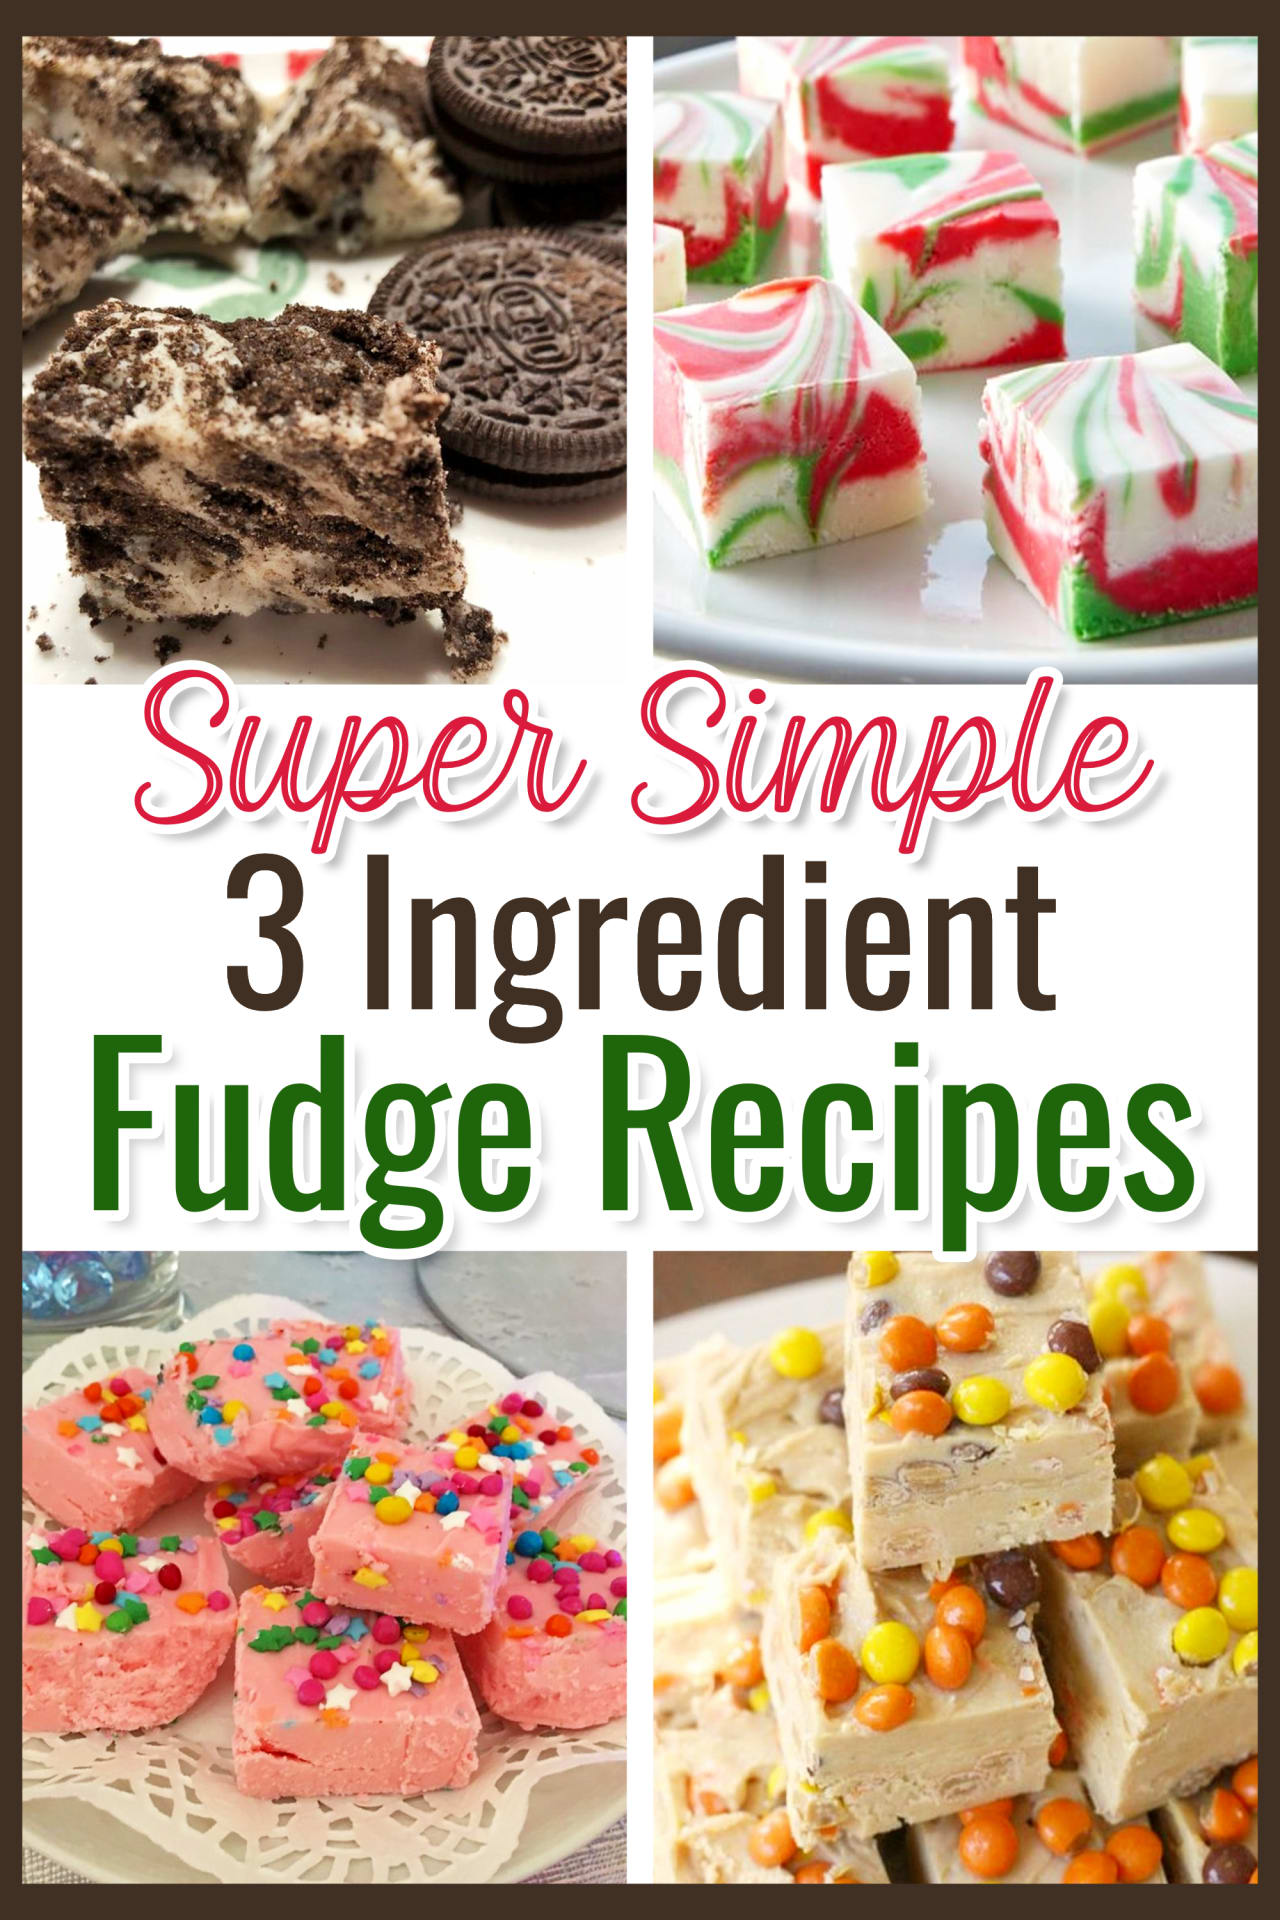 Super simple 3 ingredient fudge recipes - easy fudge recipes with only 3 ingredients on less - easy desserts and sweet treats for a crowd, party, homemade edible food gifts, Holiday party, birthday party and more. Super Simple Sweet Treats For a Crowd, For Parties or as Easy Homemade Dessert Gifts and easy Christmas desserts